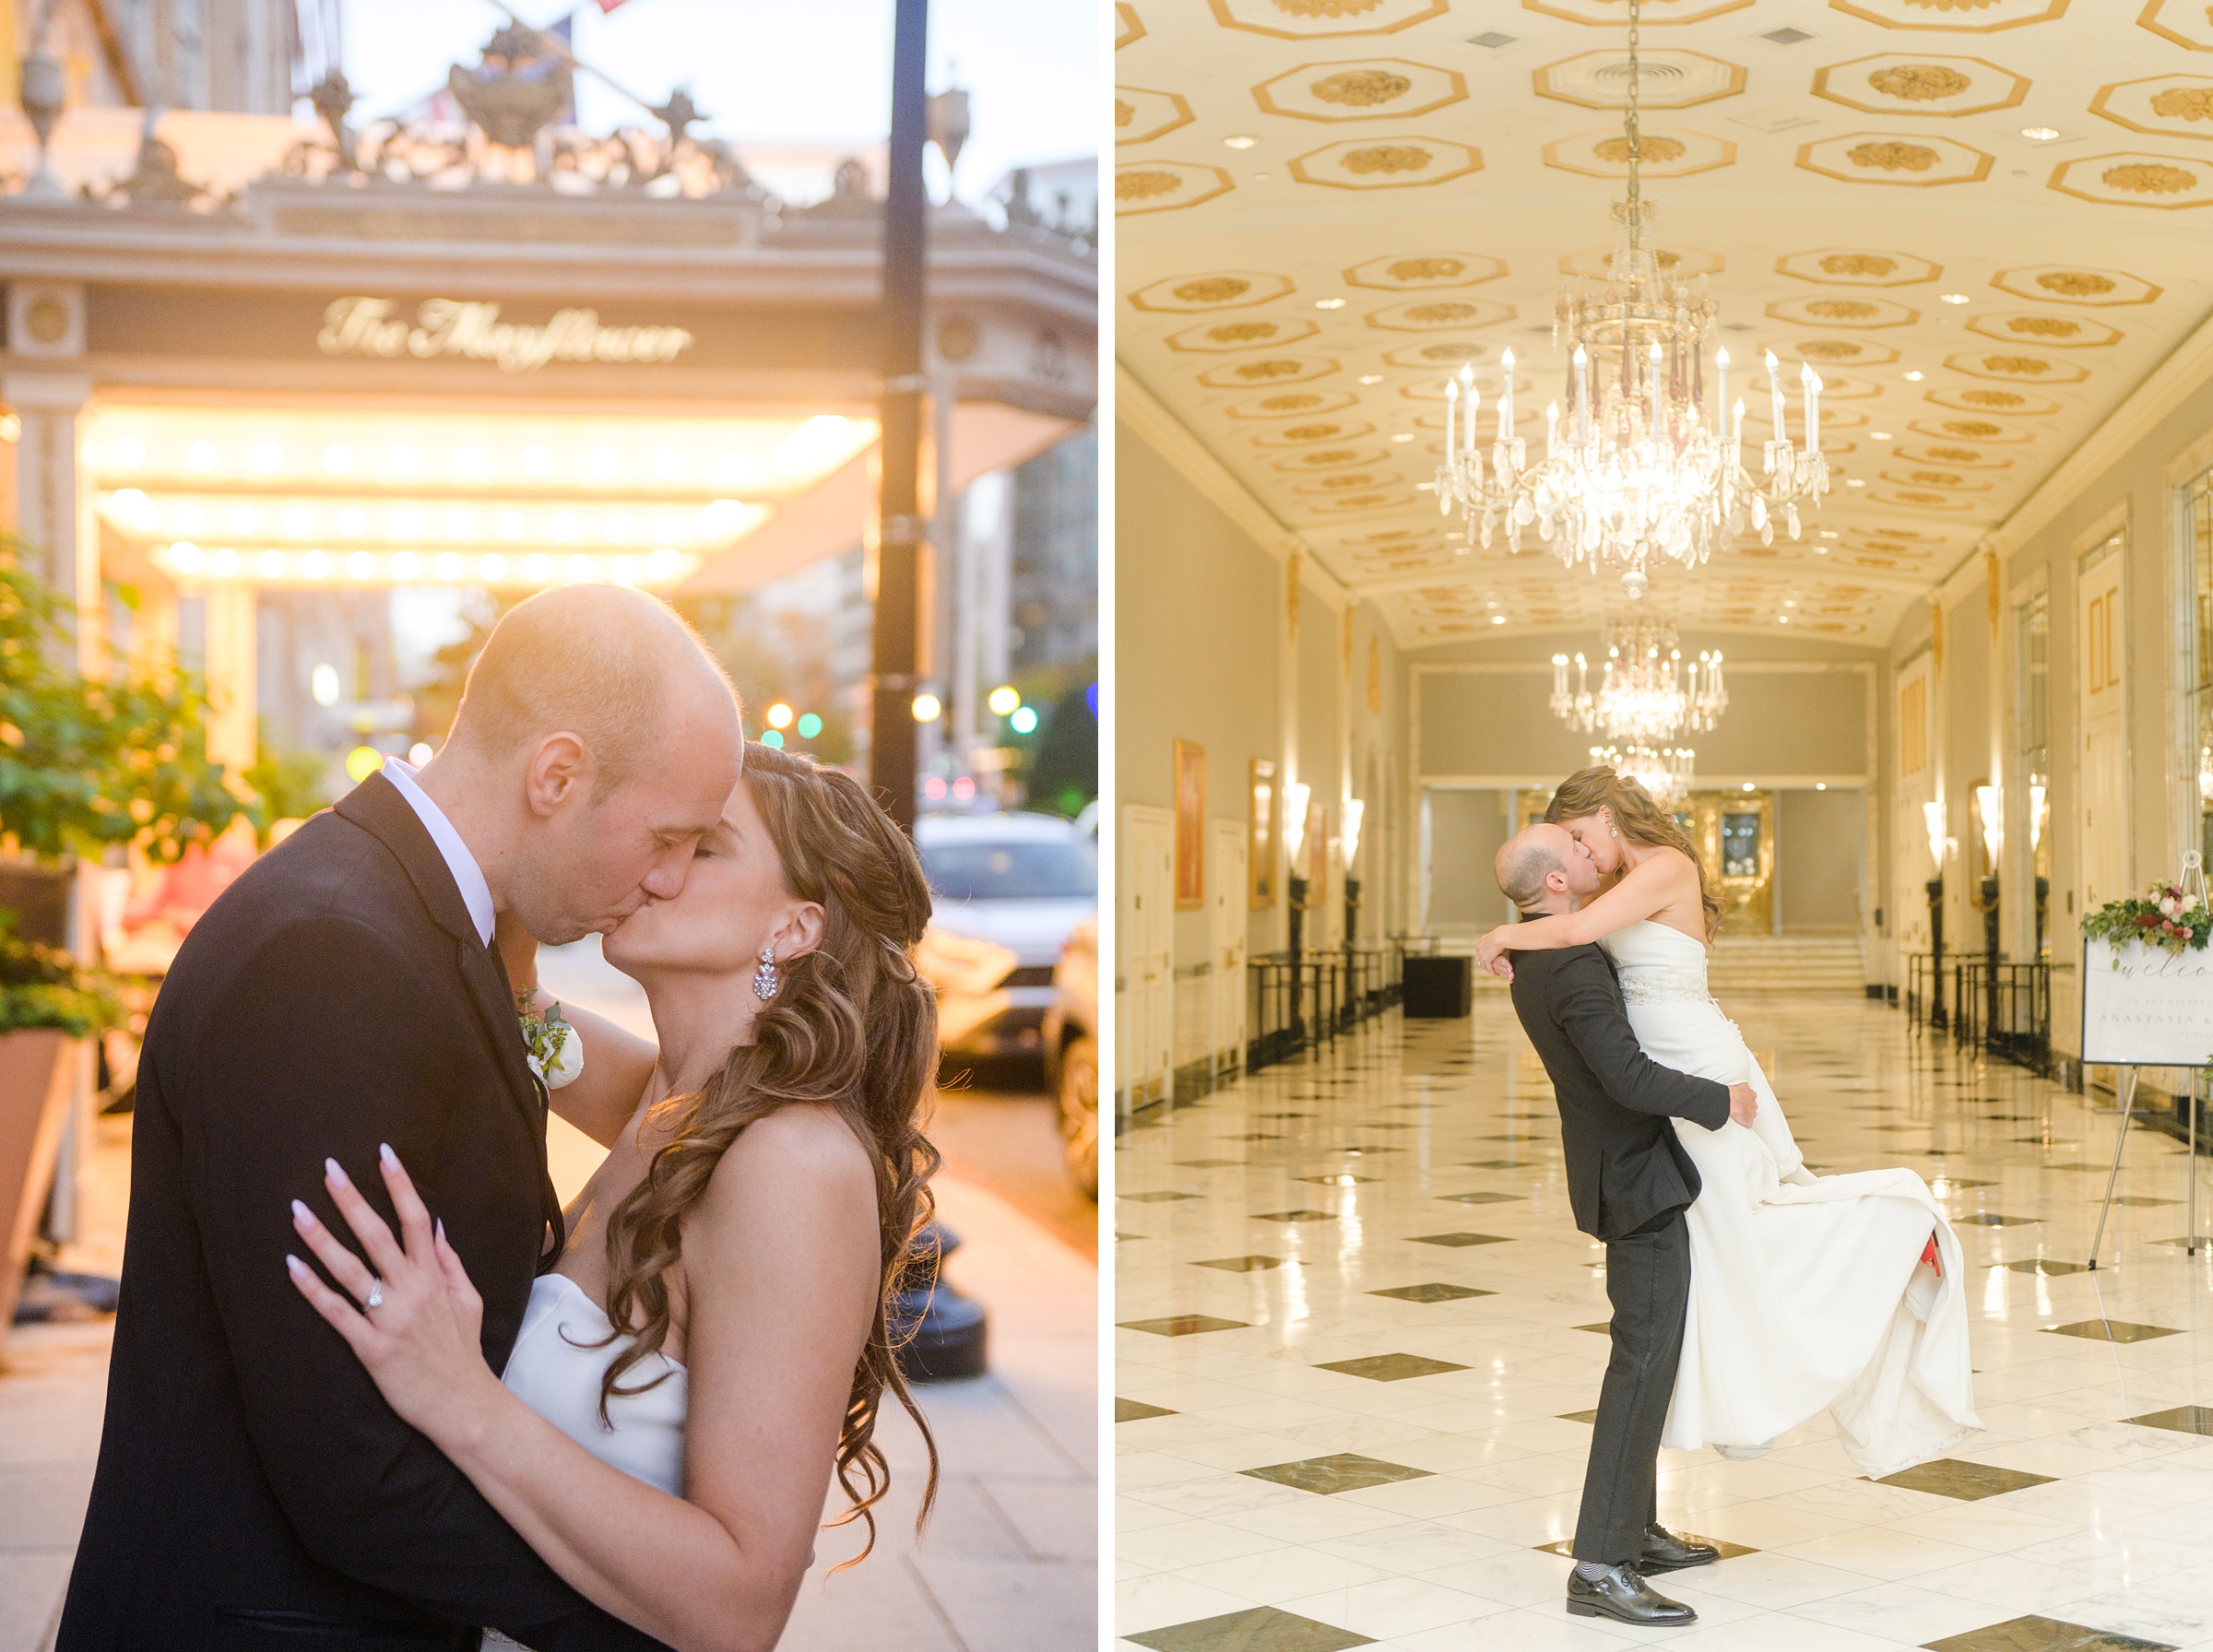 Burgundy and white Fall wedding day portraits and details featuring Mayflower Hotel DC wedding photos photographed by Baltimore wedding photographer Cait Kramer Photography